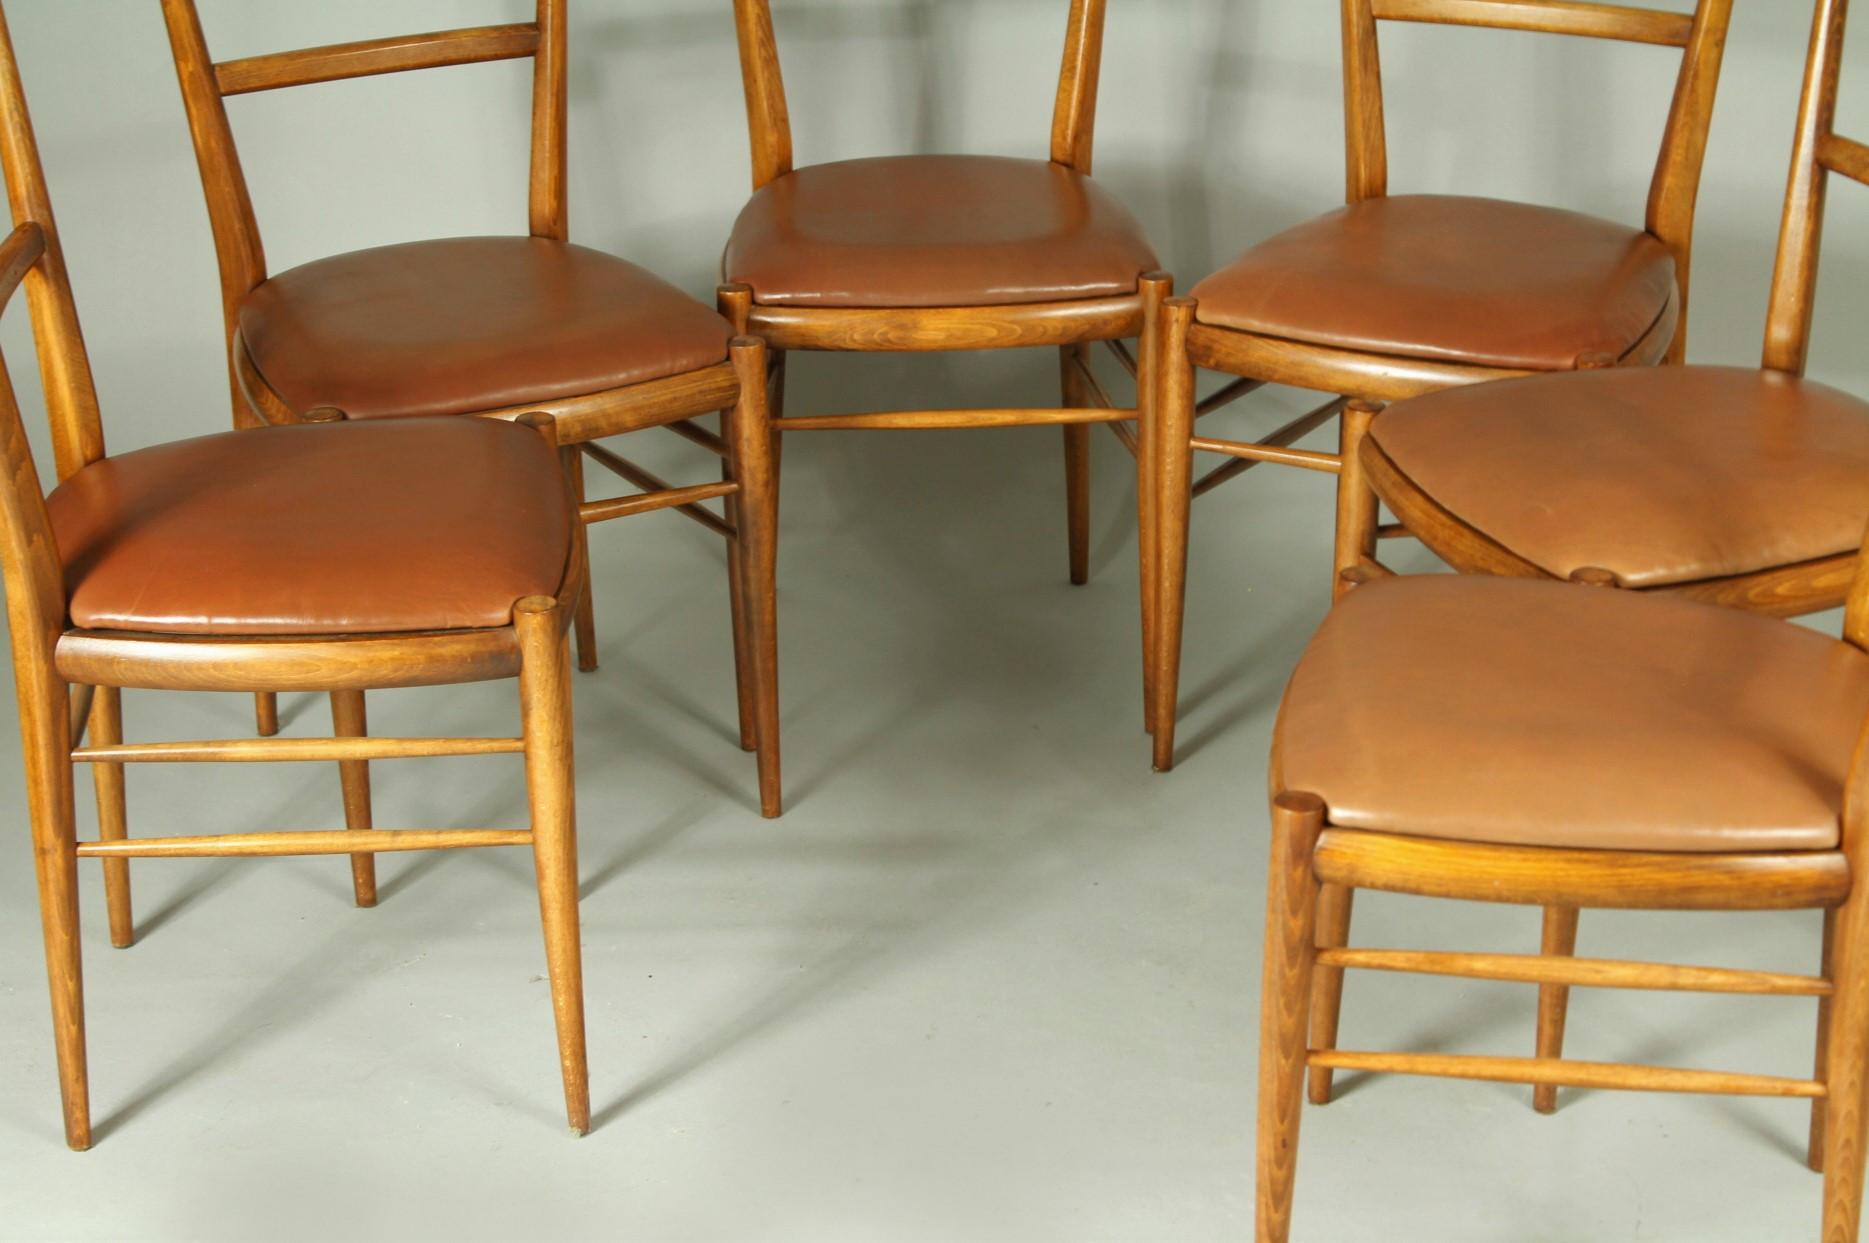 1970s Set of 6 Beech Dining Chairs, Leather Upholstery In Good Condition For Sale In Tochovice, CZ